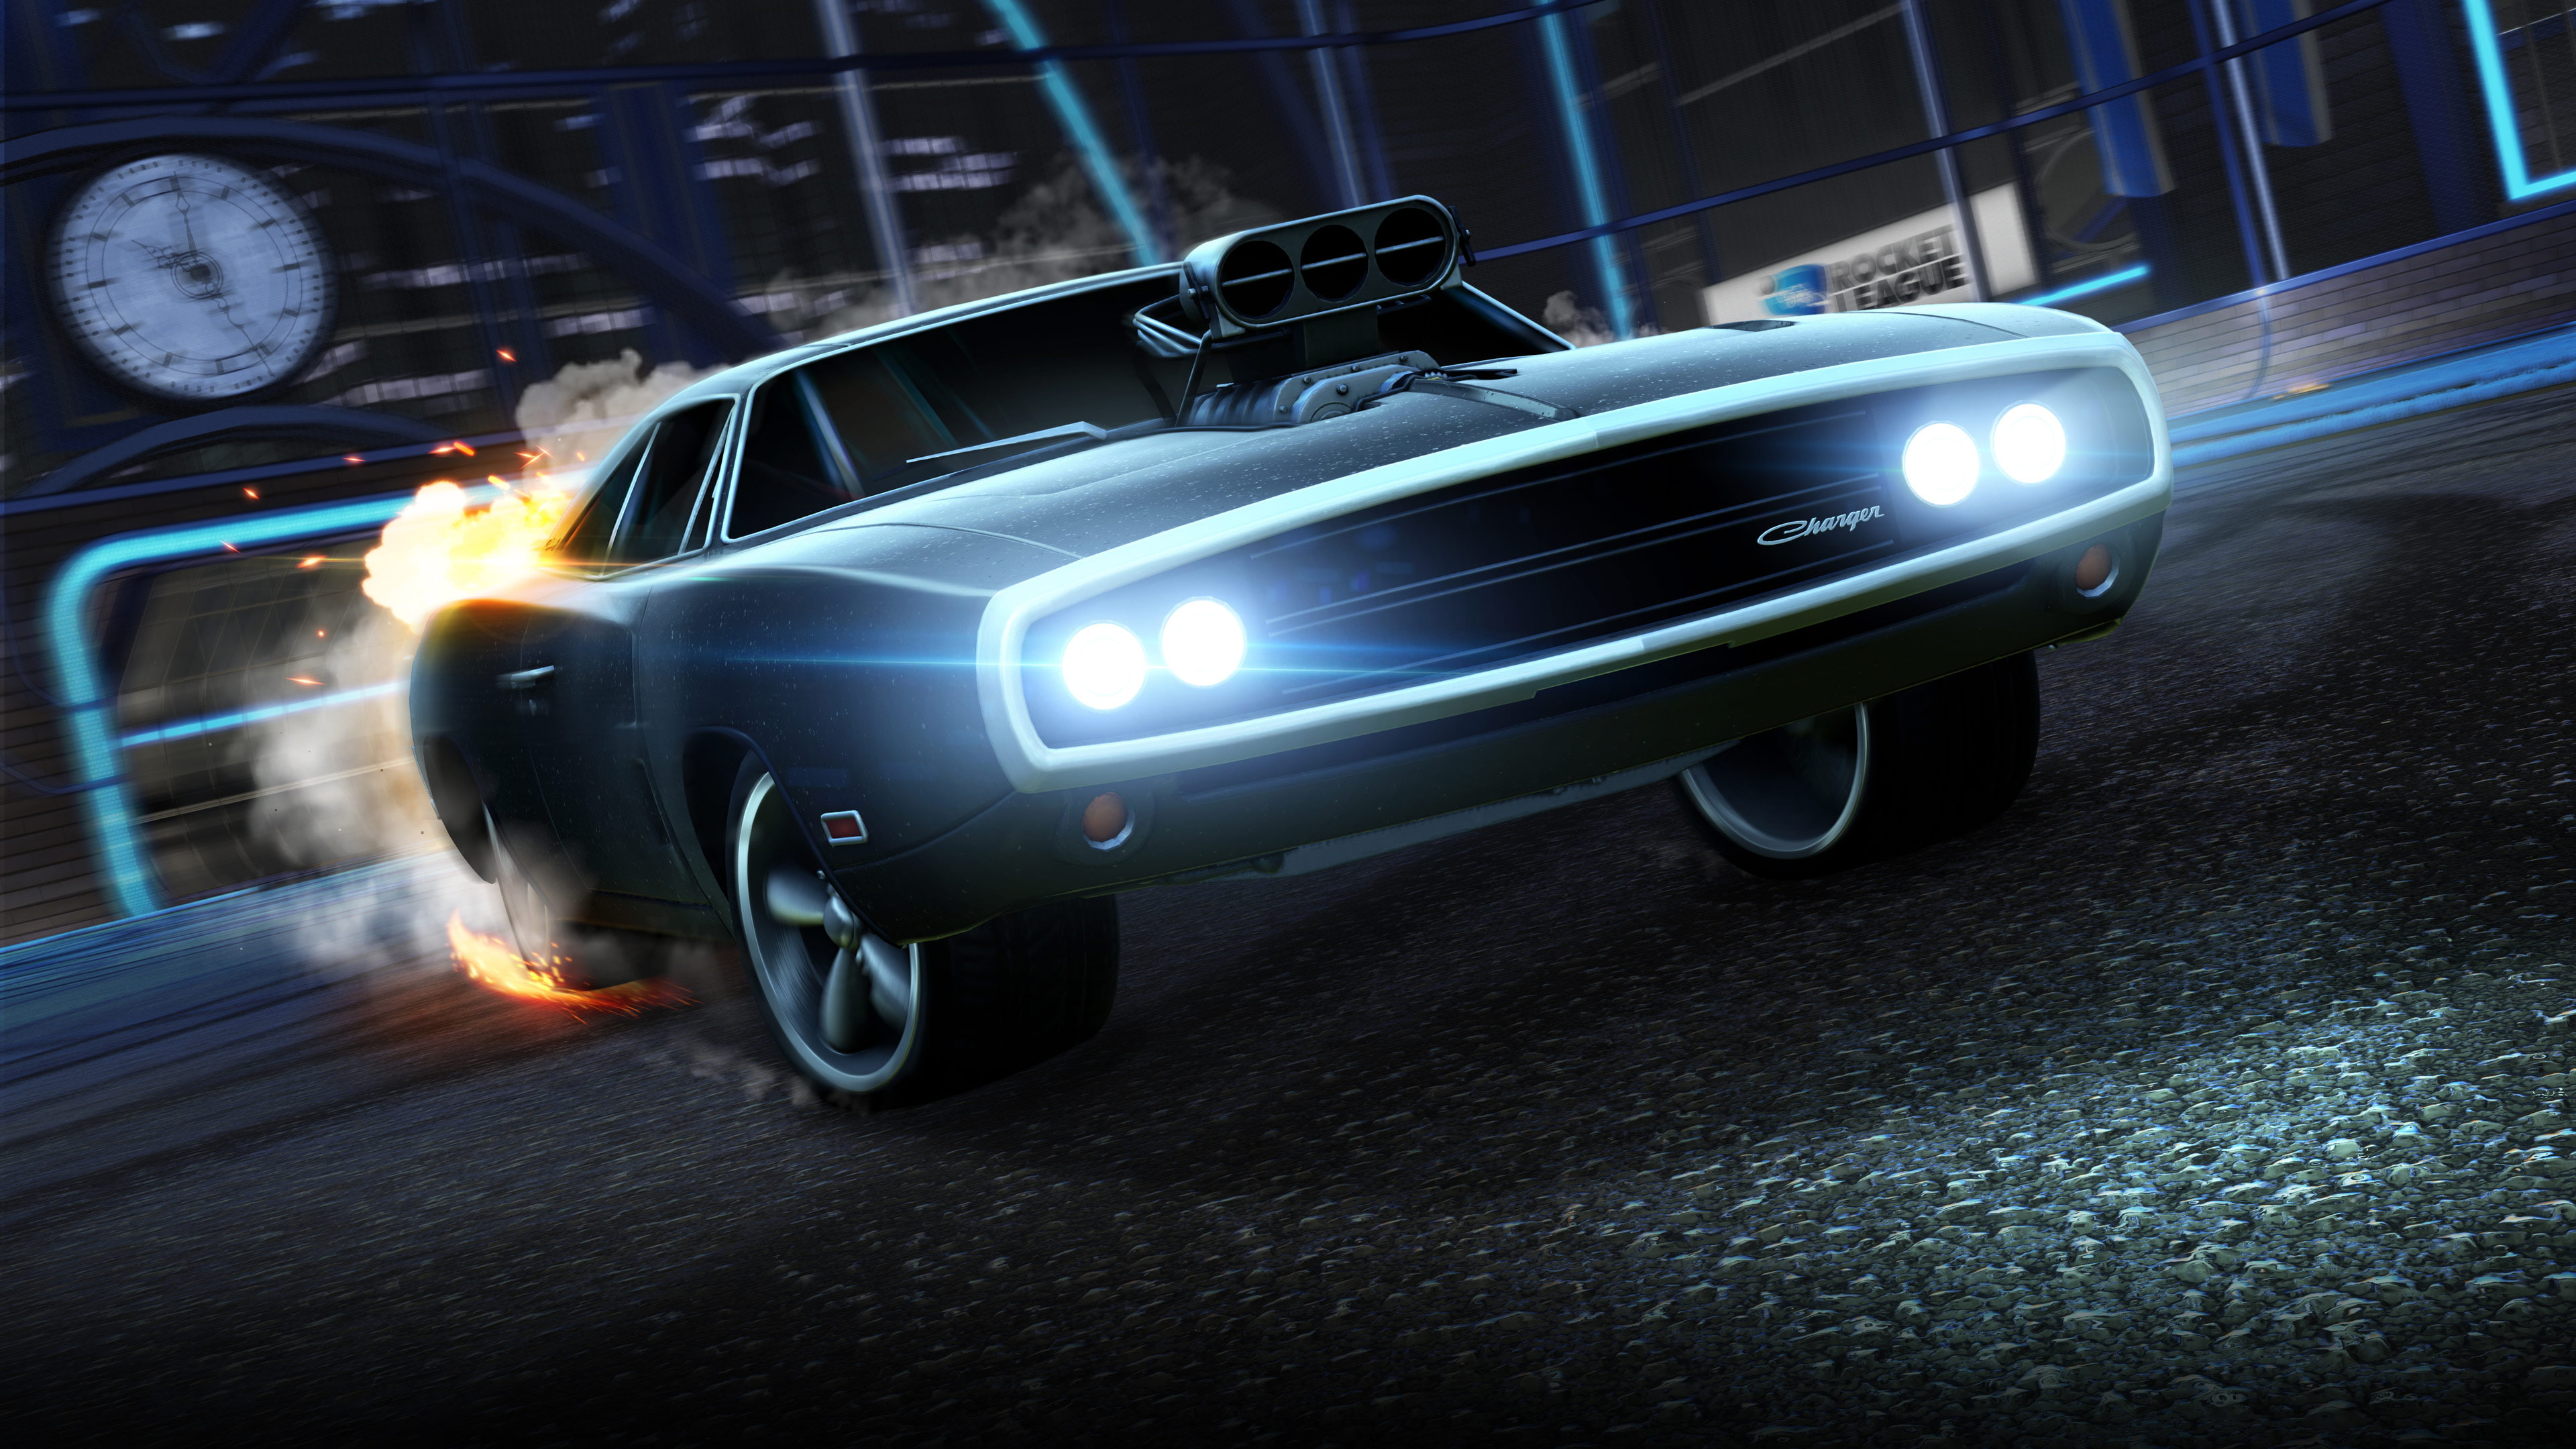 Wallpaper Fast And Furious, 4k, Dodge Charger, Rocket League Wallpaper, Game